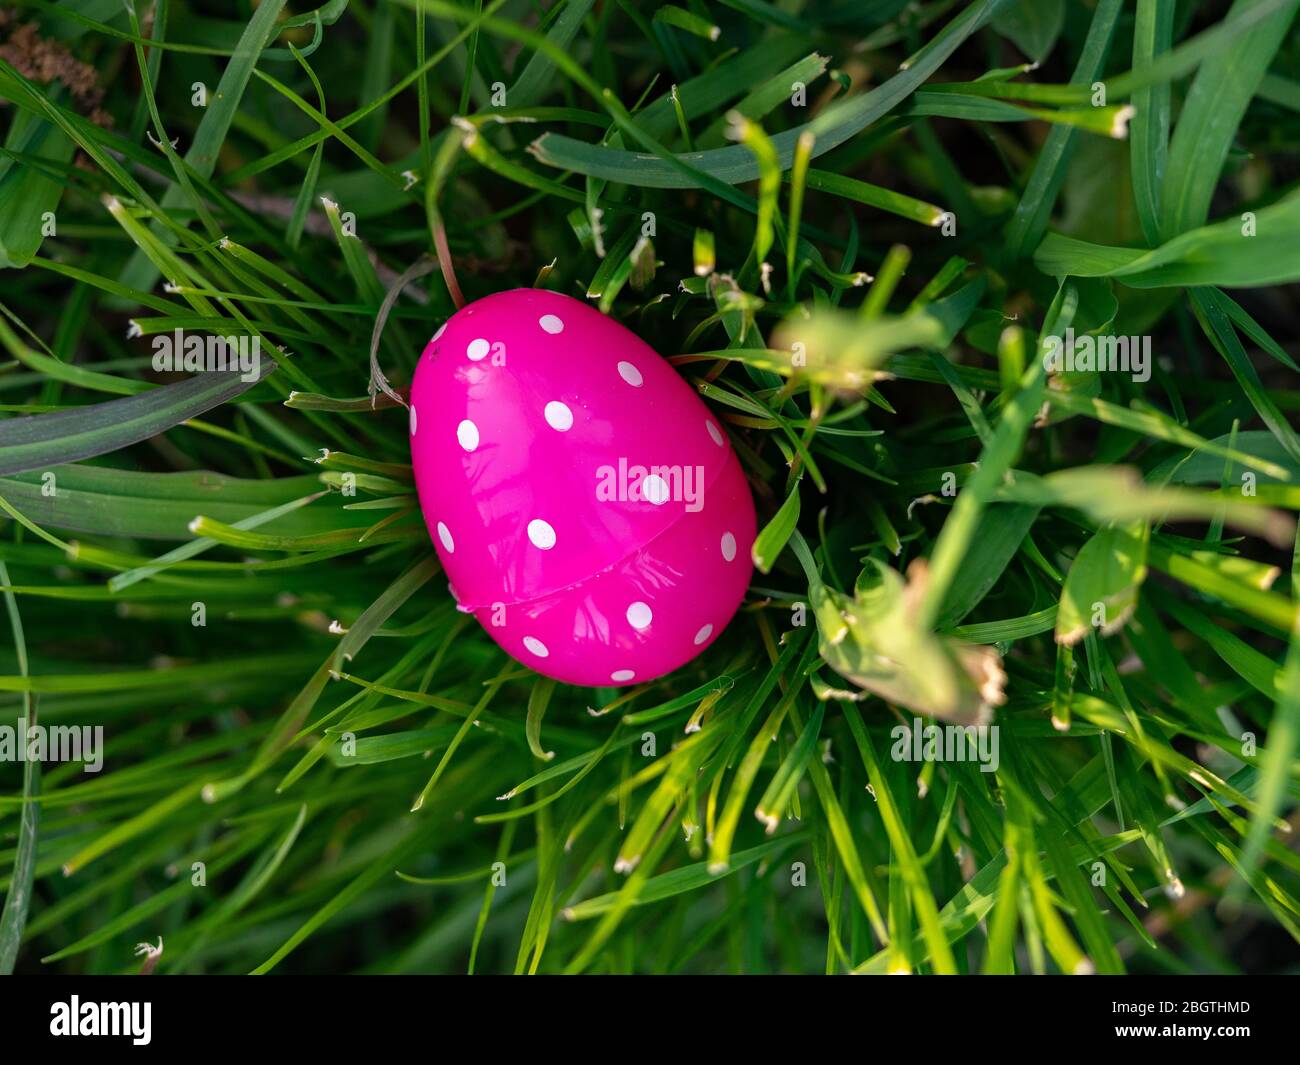 Lone pink polka dotted Easter egg in grass on a sunny day Stock Photo